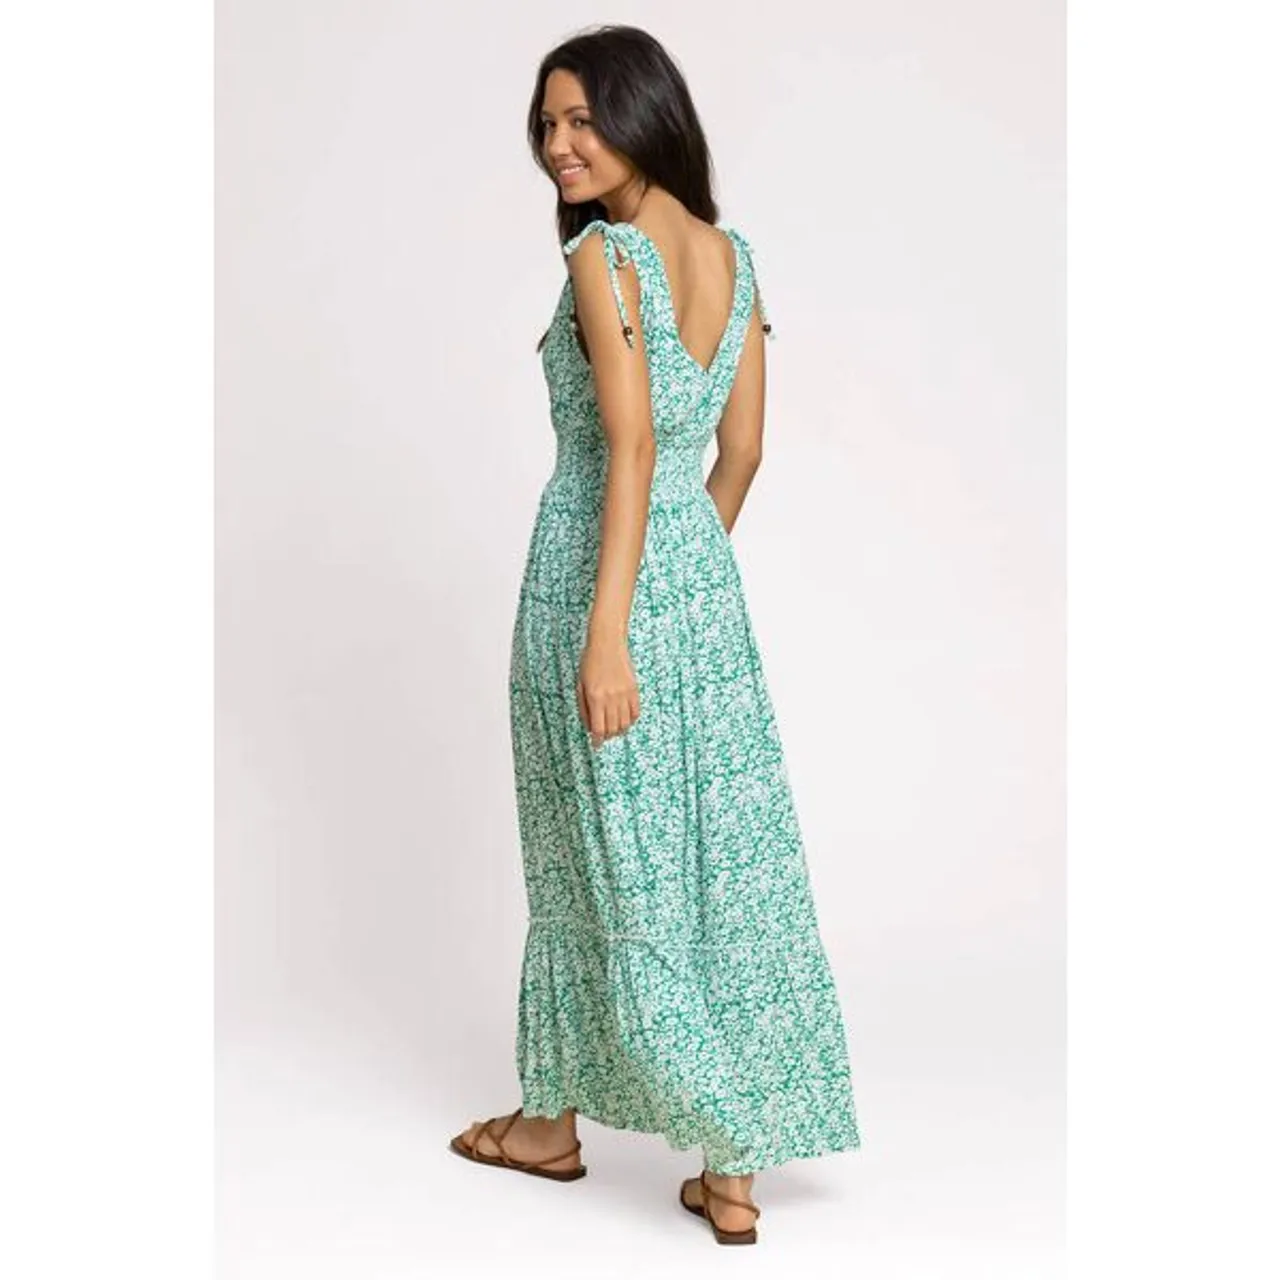 Roman Ditsy Floral Shirred Waist Maxi Dress in Green - Size 18 18 female